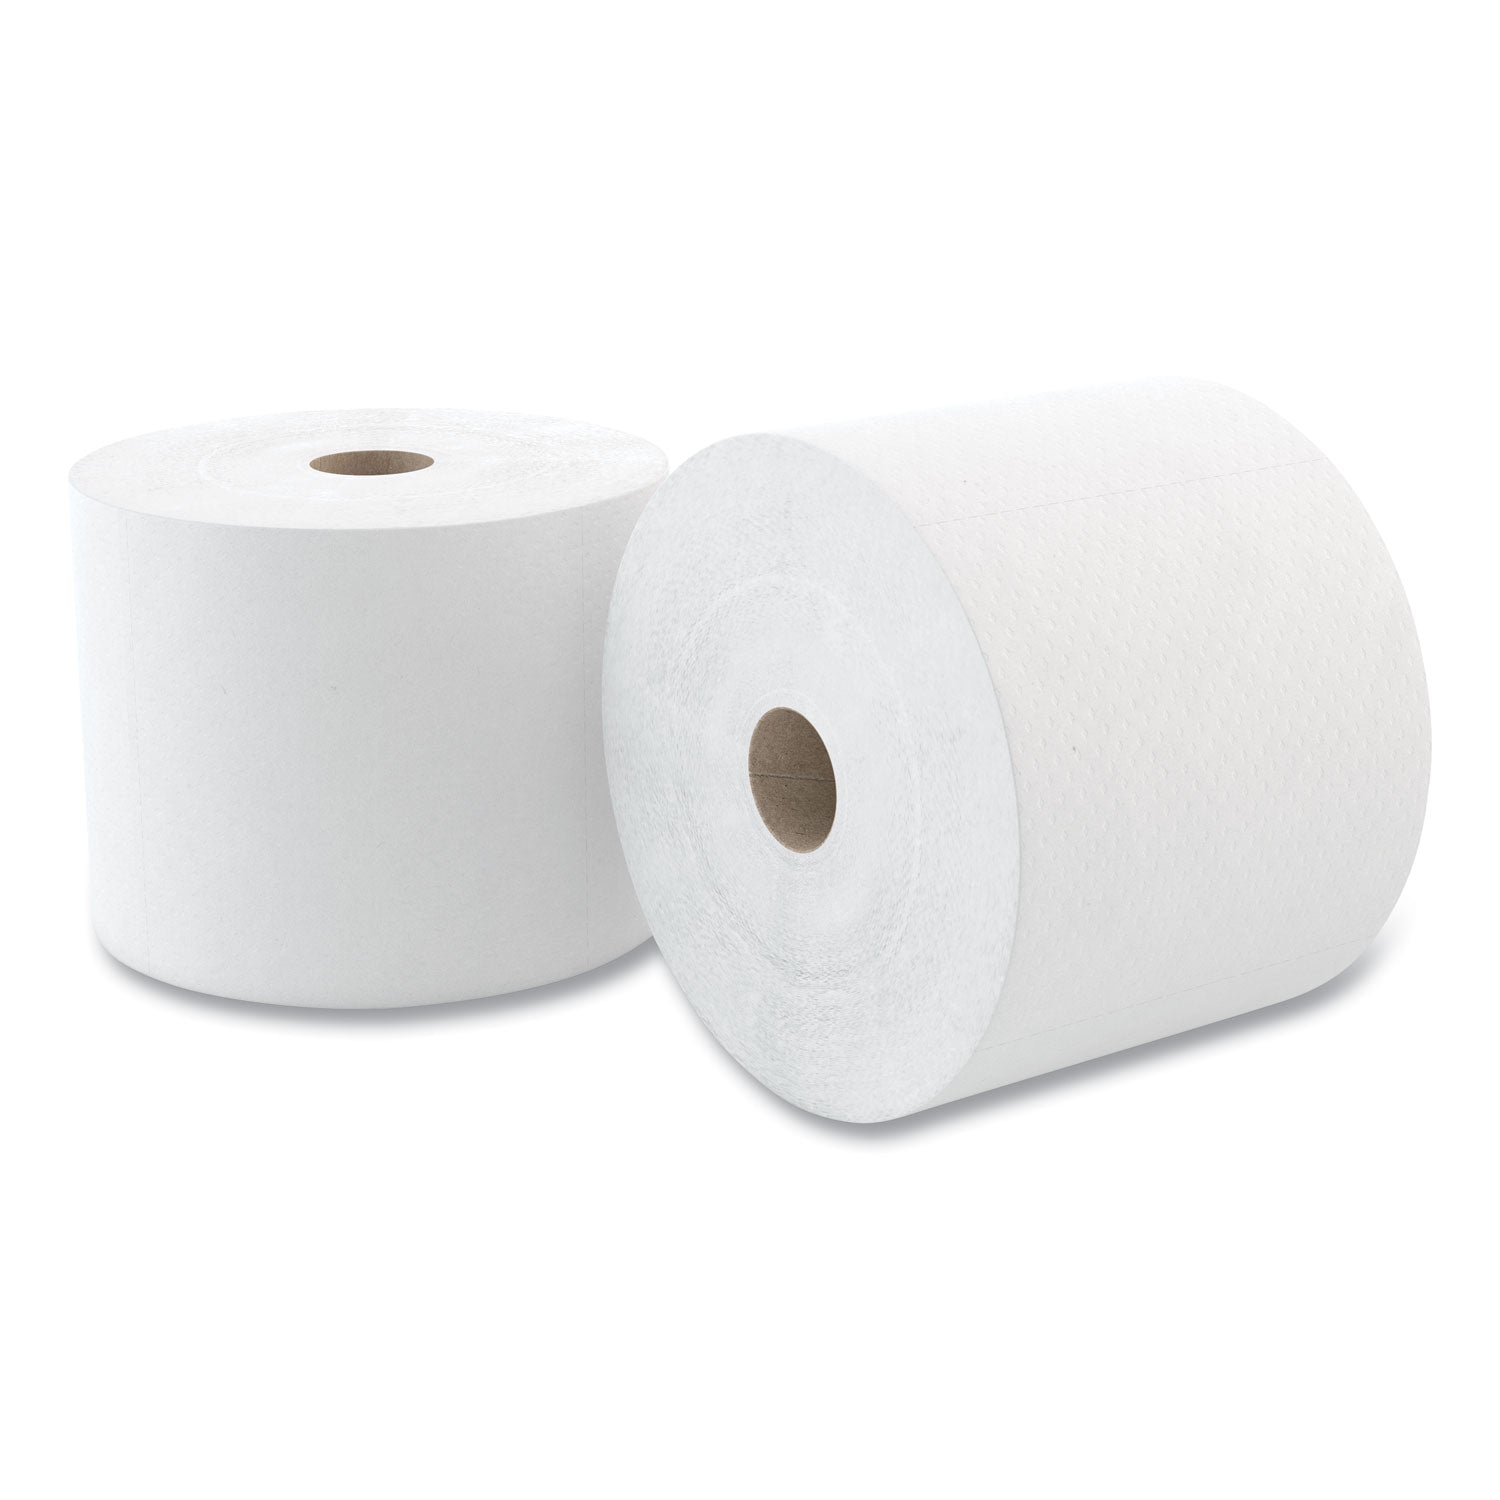 perform-bathroom-tissue-for-tandem-dispensers-septic-safe-2-ply-white-950-roll-36-rolls-carton_csdt150 - 1